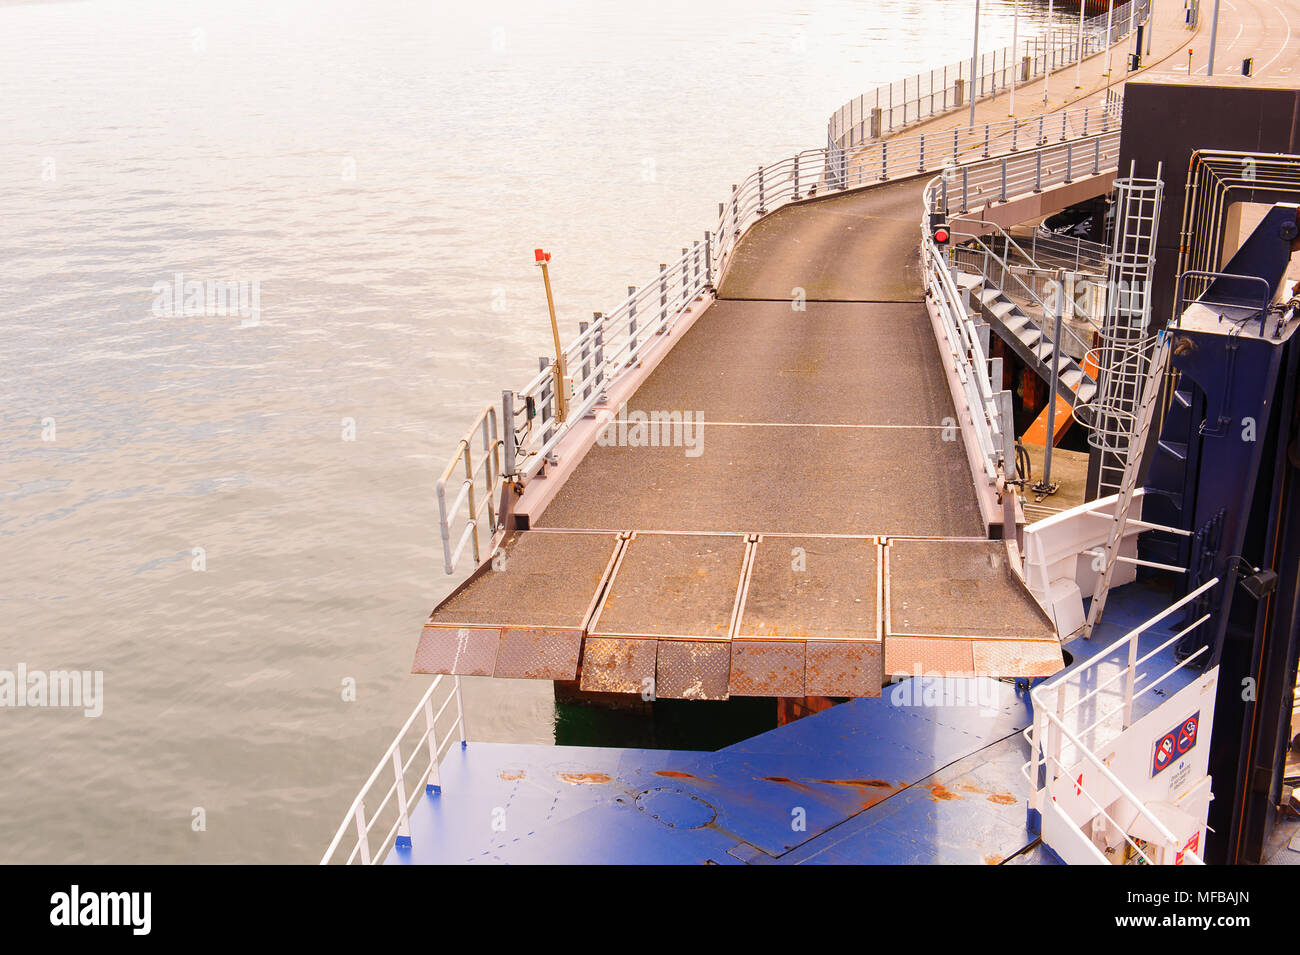 Road for transport of vehicles over the ship to cross the strait Stock Photo